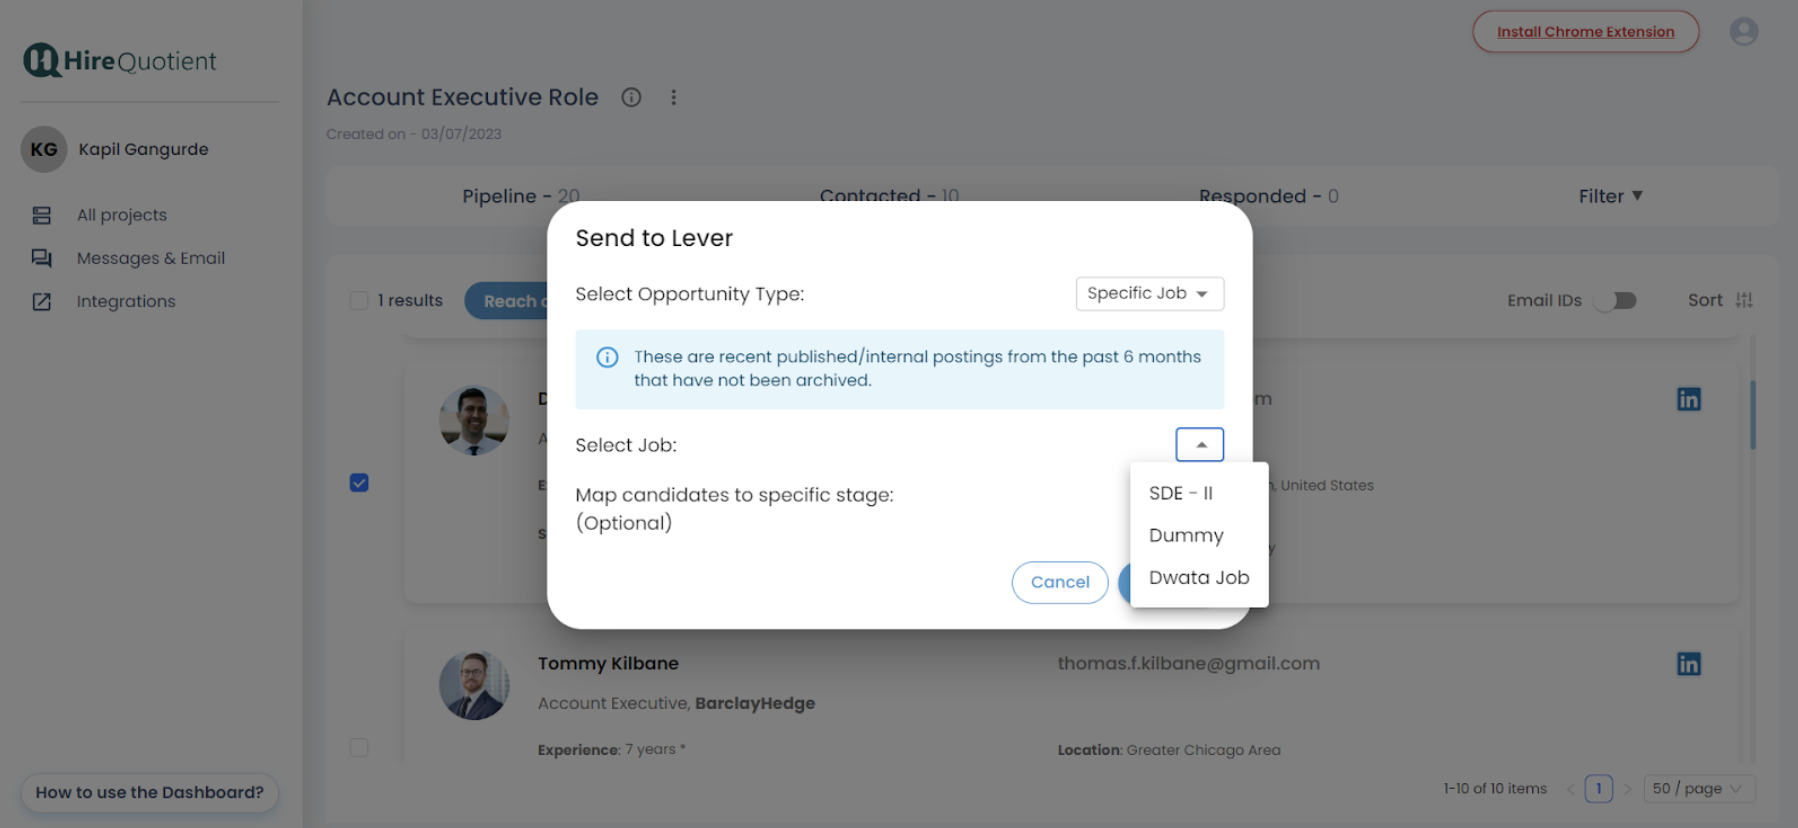 Send to Lever modal in EasySource with job selection menu expanded